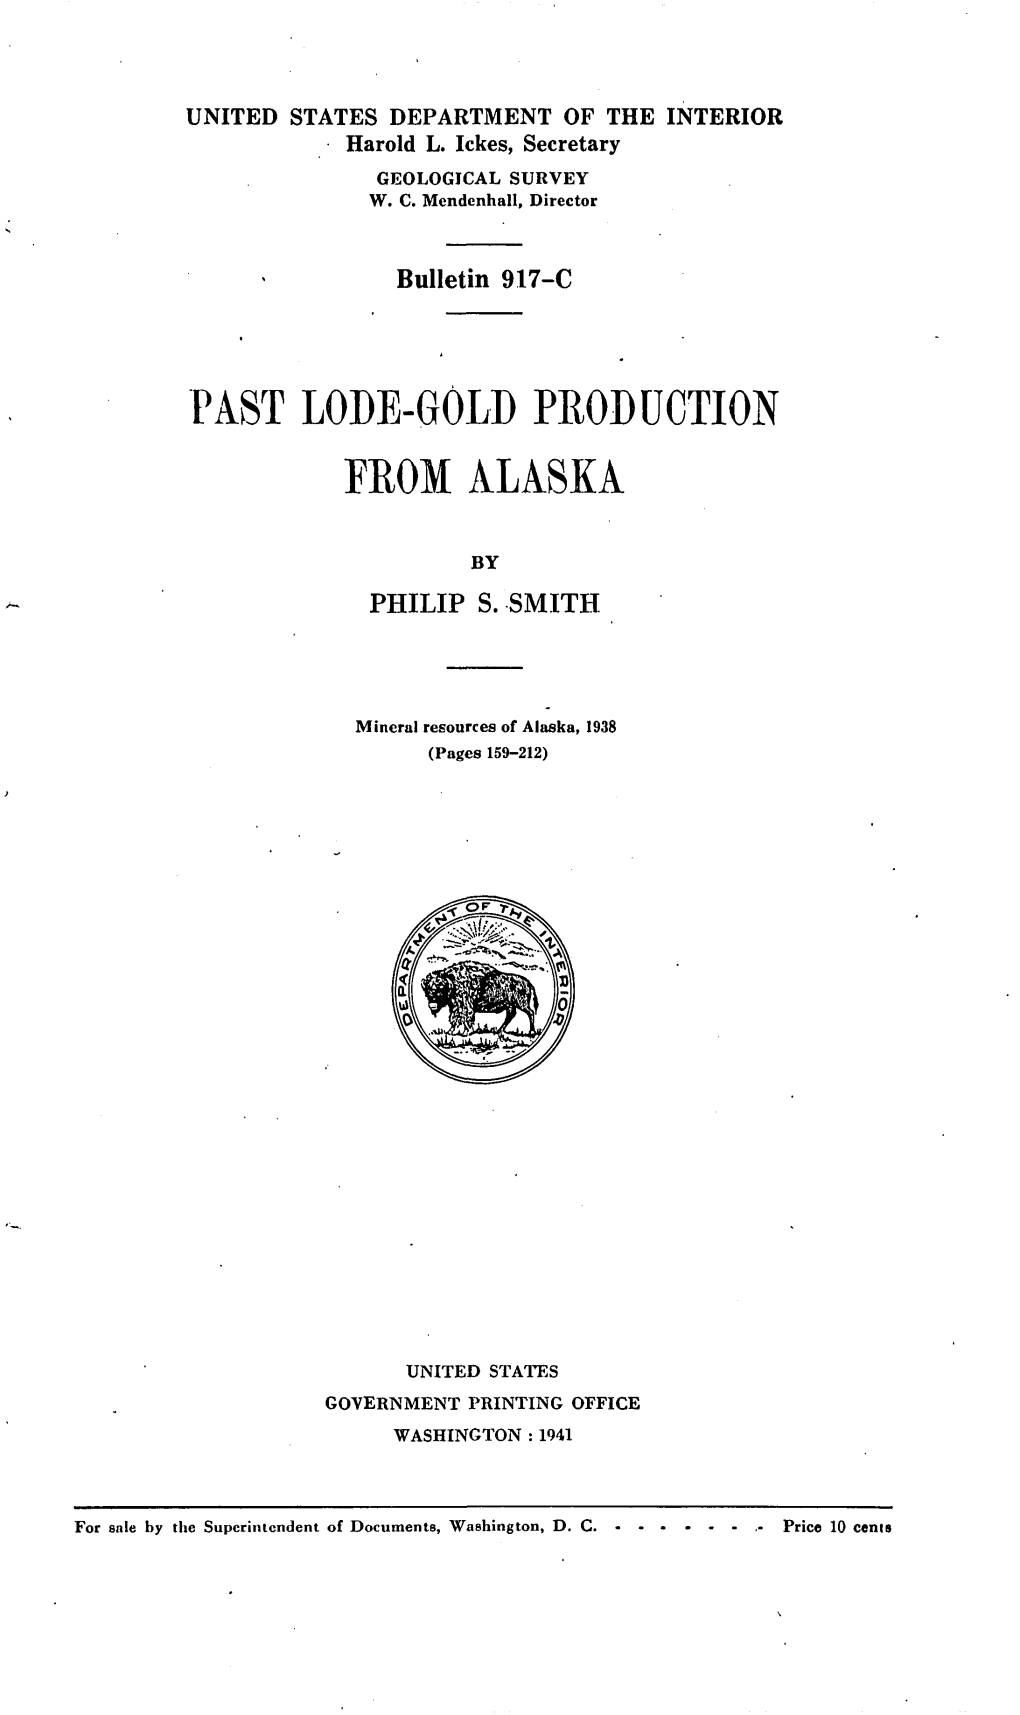 Past Lode-Gold Production from Alaska